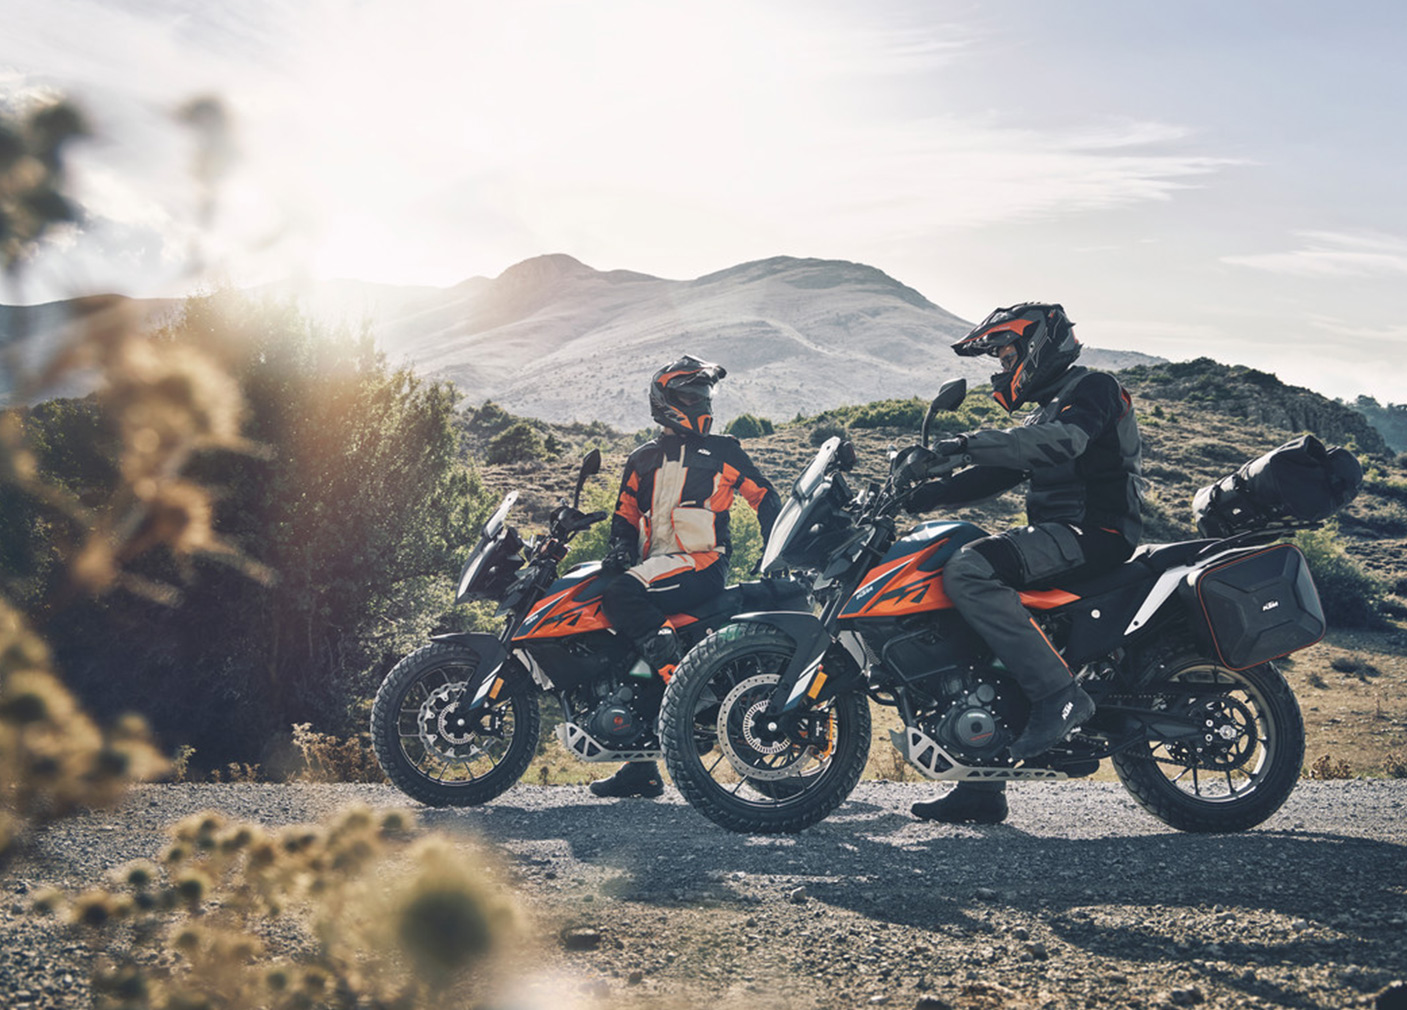 The KTM 390 Adventure - Review with Brayden